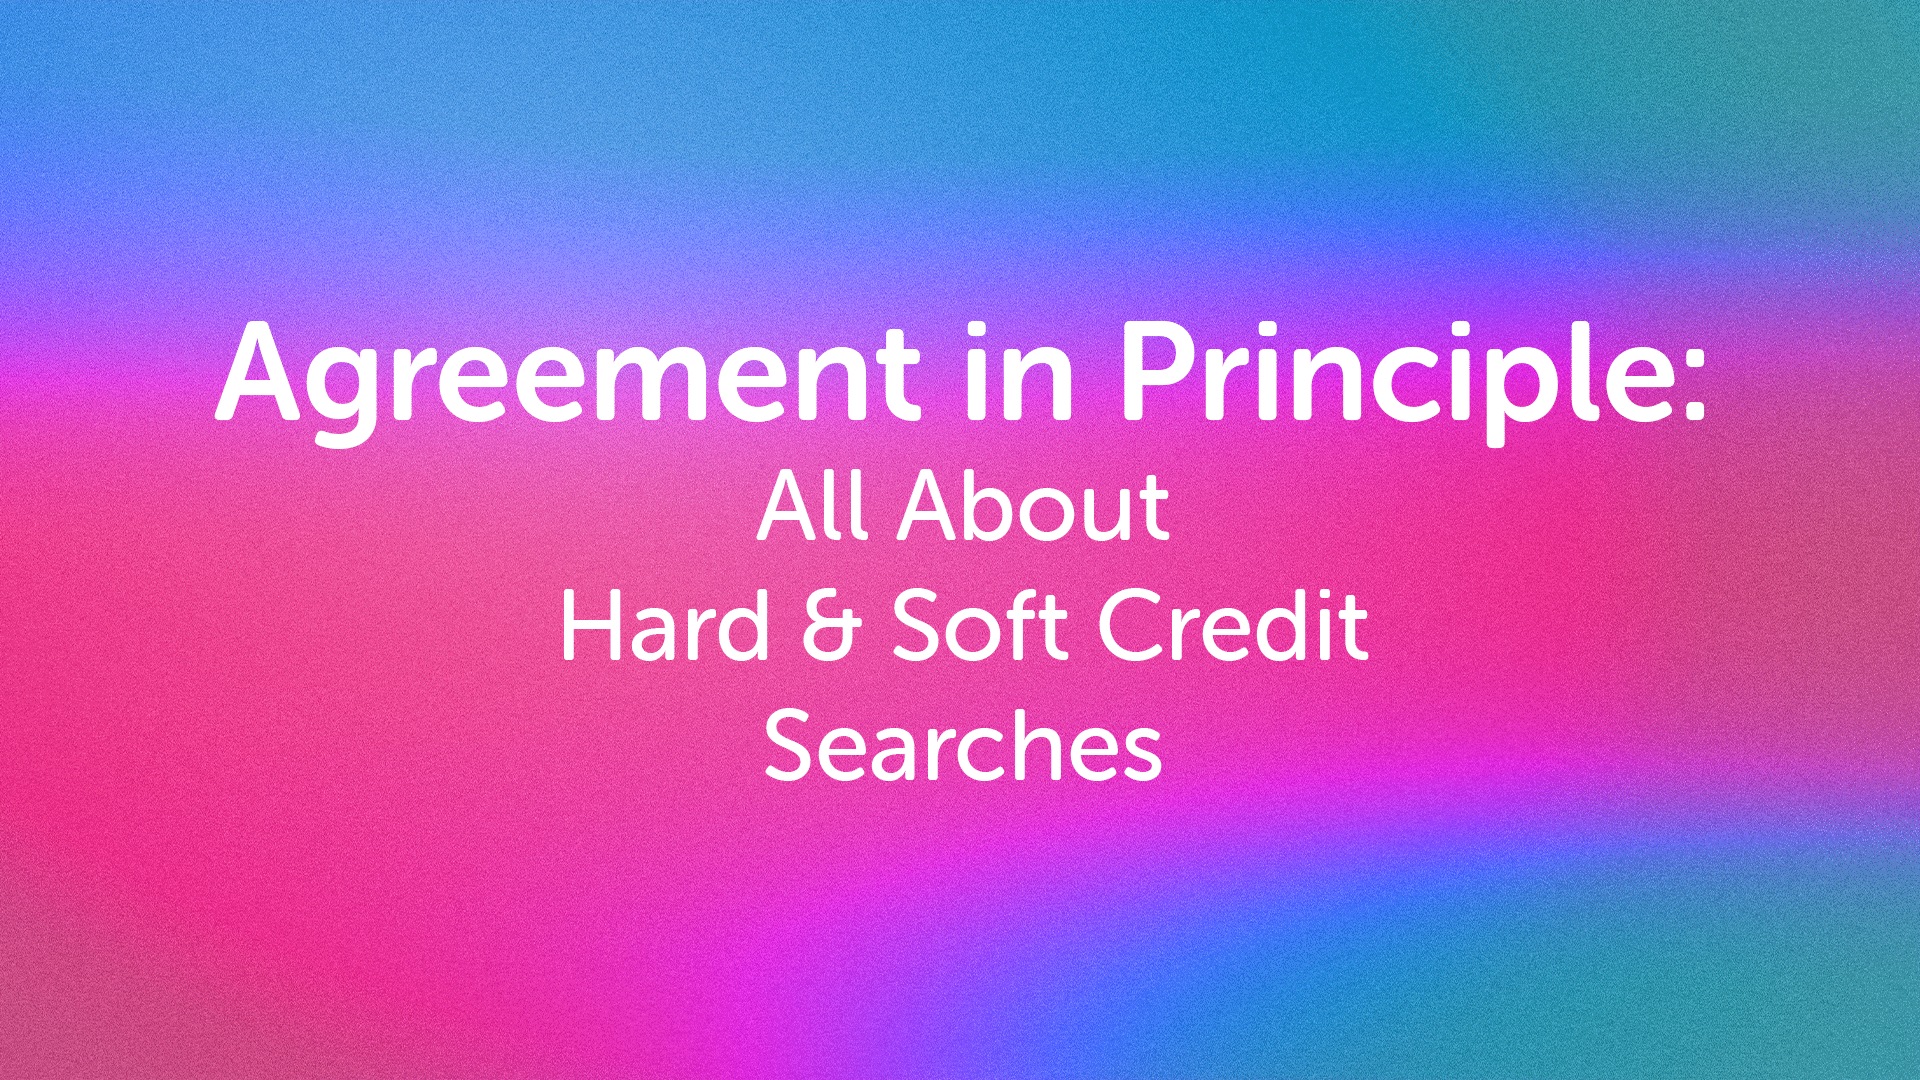 AIP: Soft and Hard Credit Searches Hull